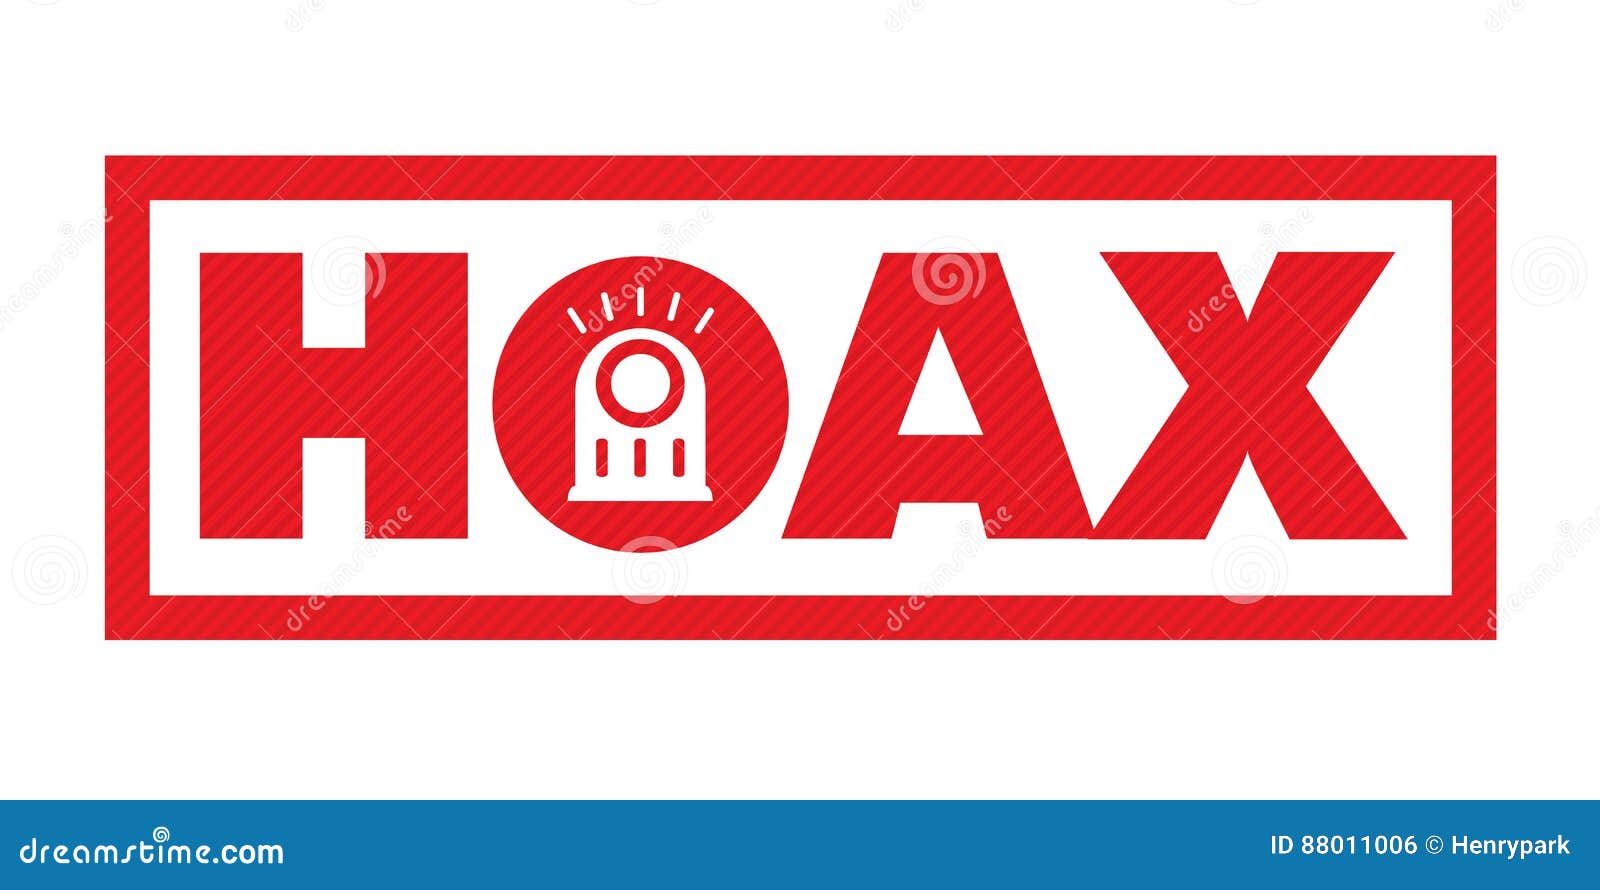 Hoax stock vector. Illustration of info, caution, conspiracy - 88011006